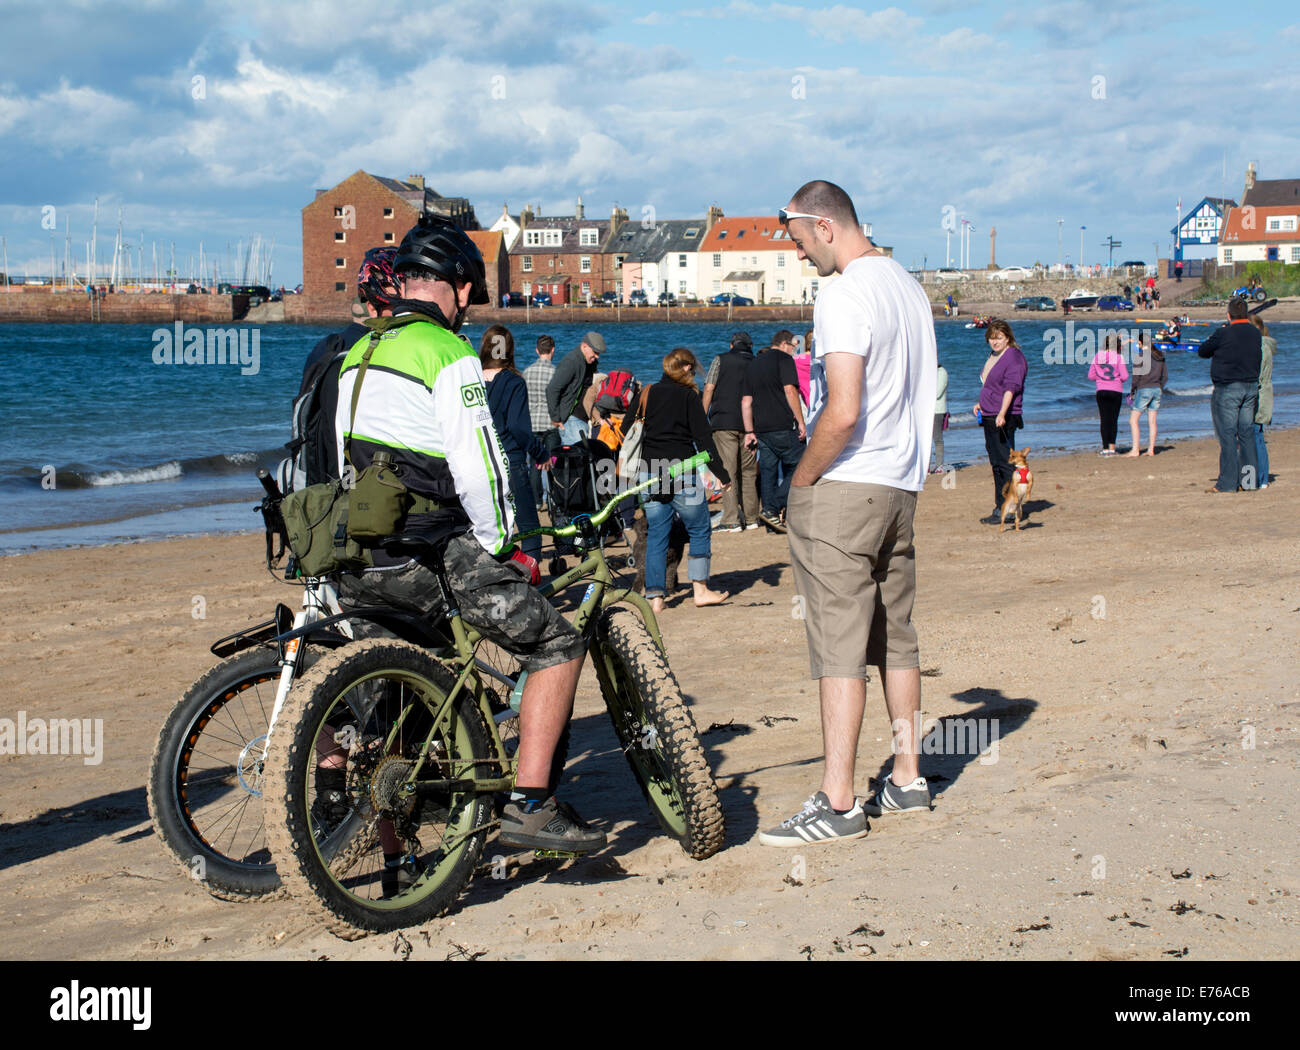 Super big bike tyres help to cycle on the sandy beach at North Berwick. Stock Photo